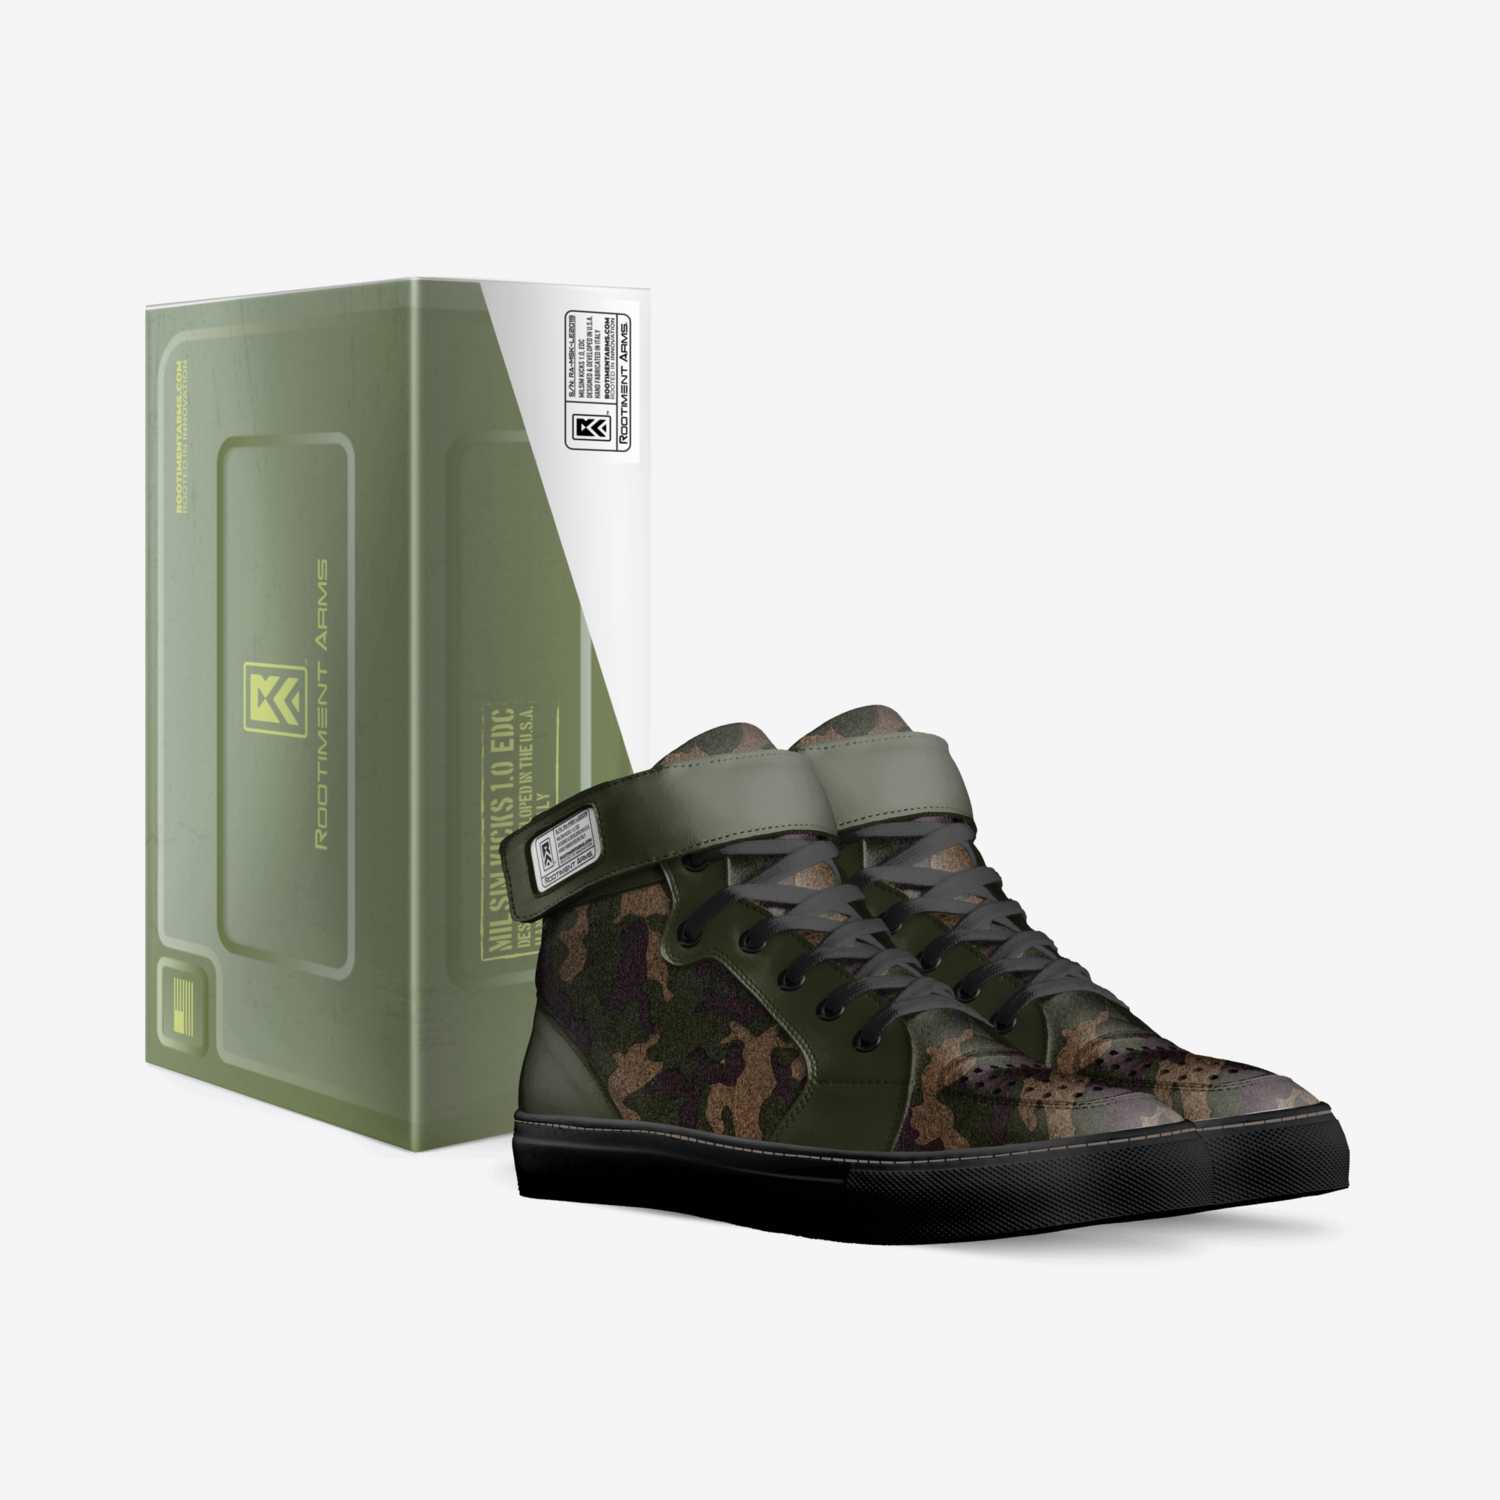 Milsim Kicks 1.0 custom made in Italy shoes by Orhan Cileli | Box view